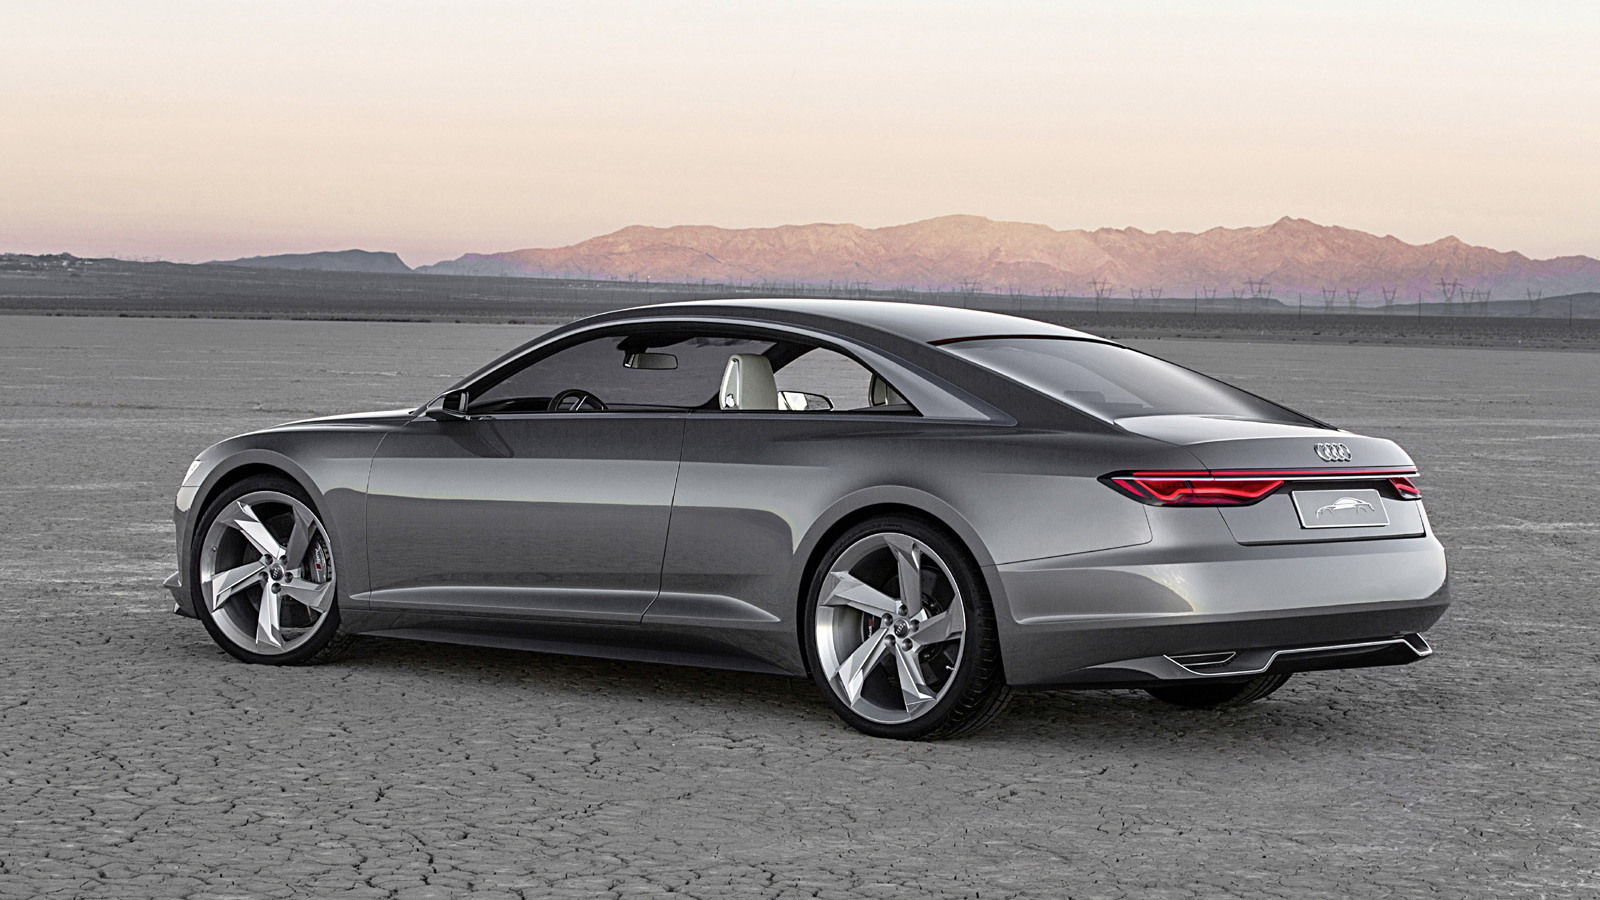 Audi Prologue Piloted Driving concept, 2015 Consumer Electronics Show.